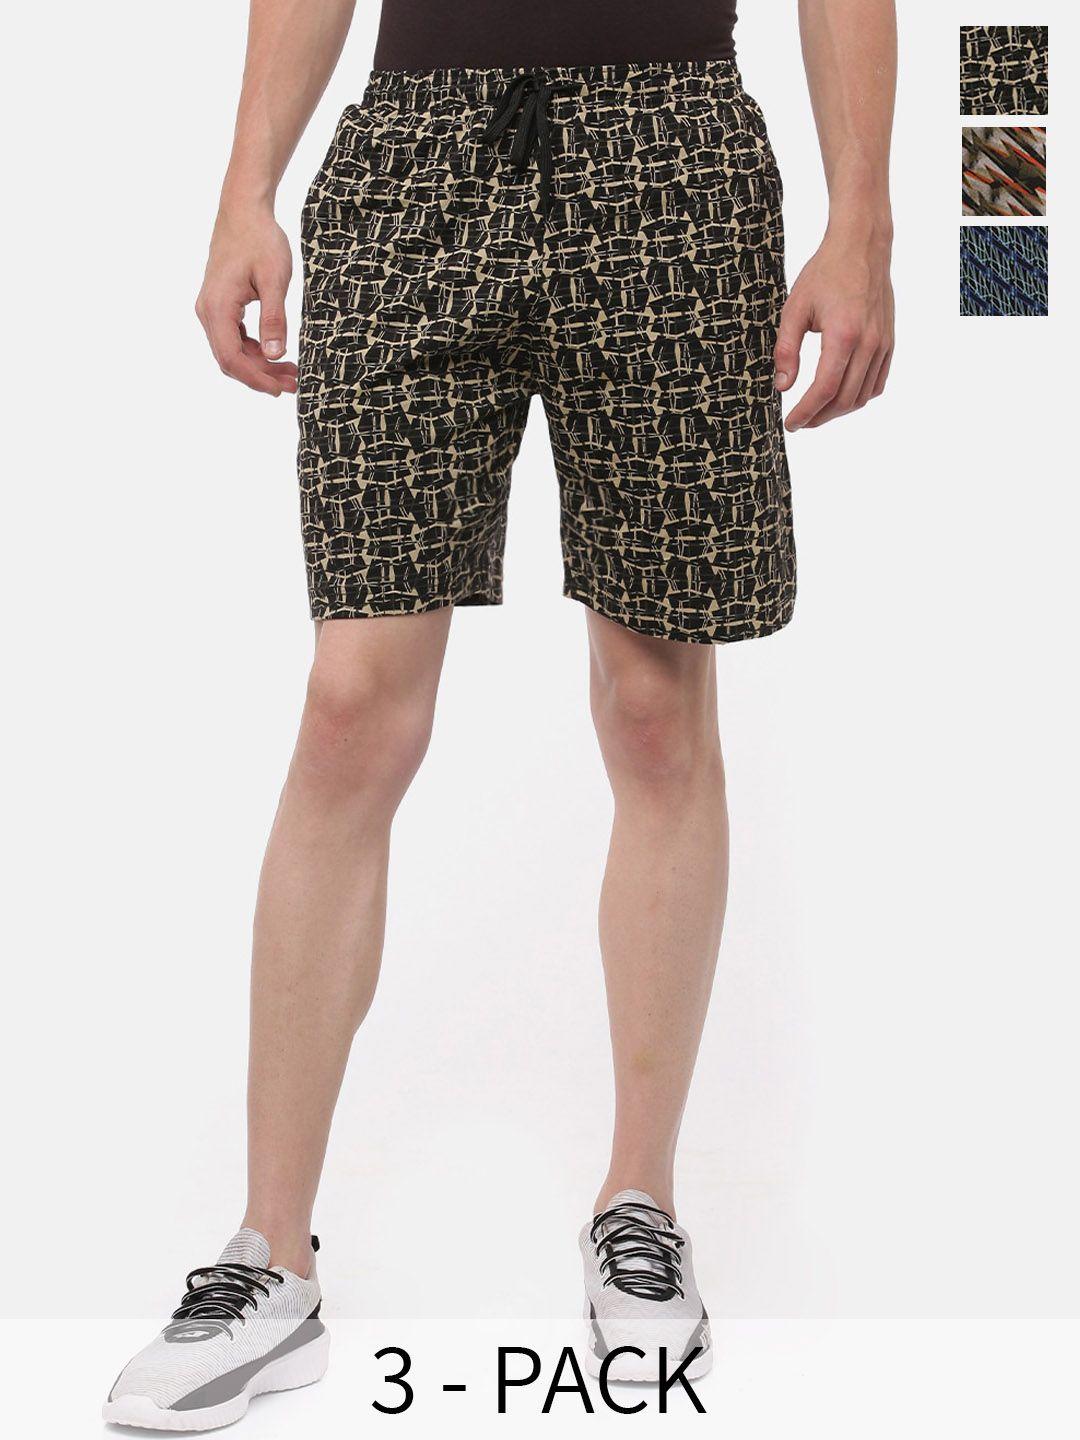 dollar-men-pack-of-3-abstract-printed-assorted-mid-rise-cotton-shorts